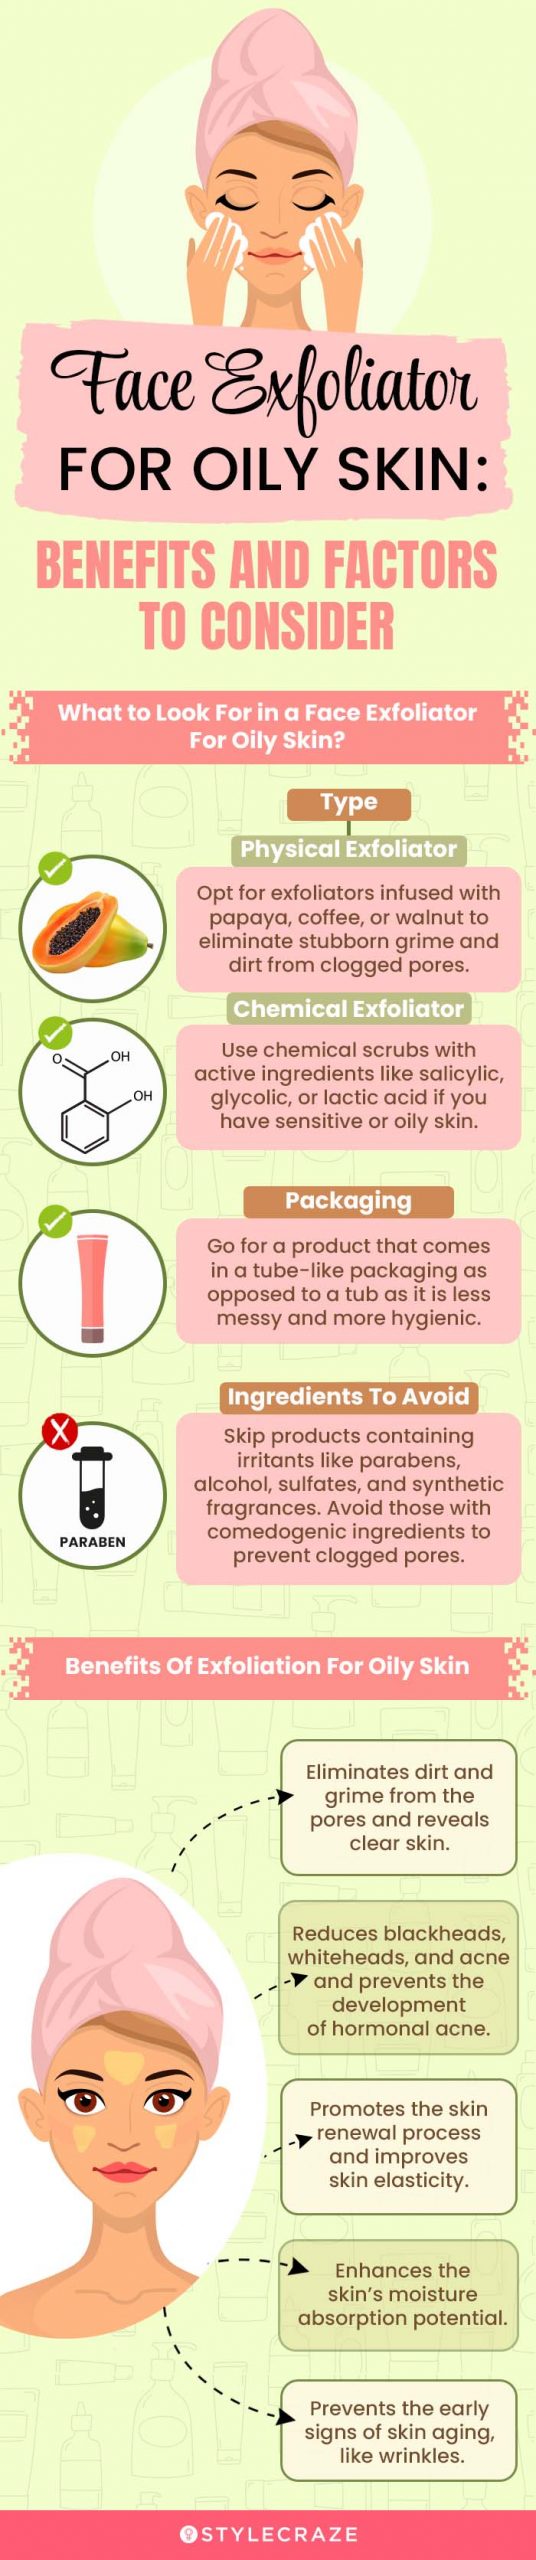 Face Exfoliator For Oily Skin: Benefits And Factors To Consider (infographic)